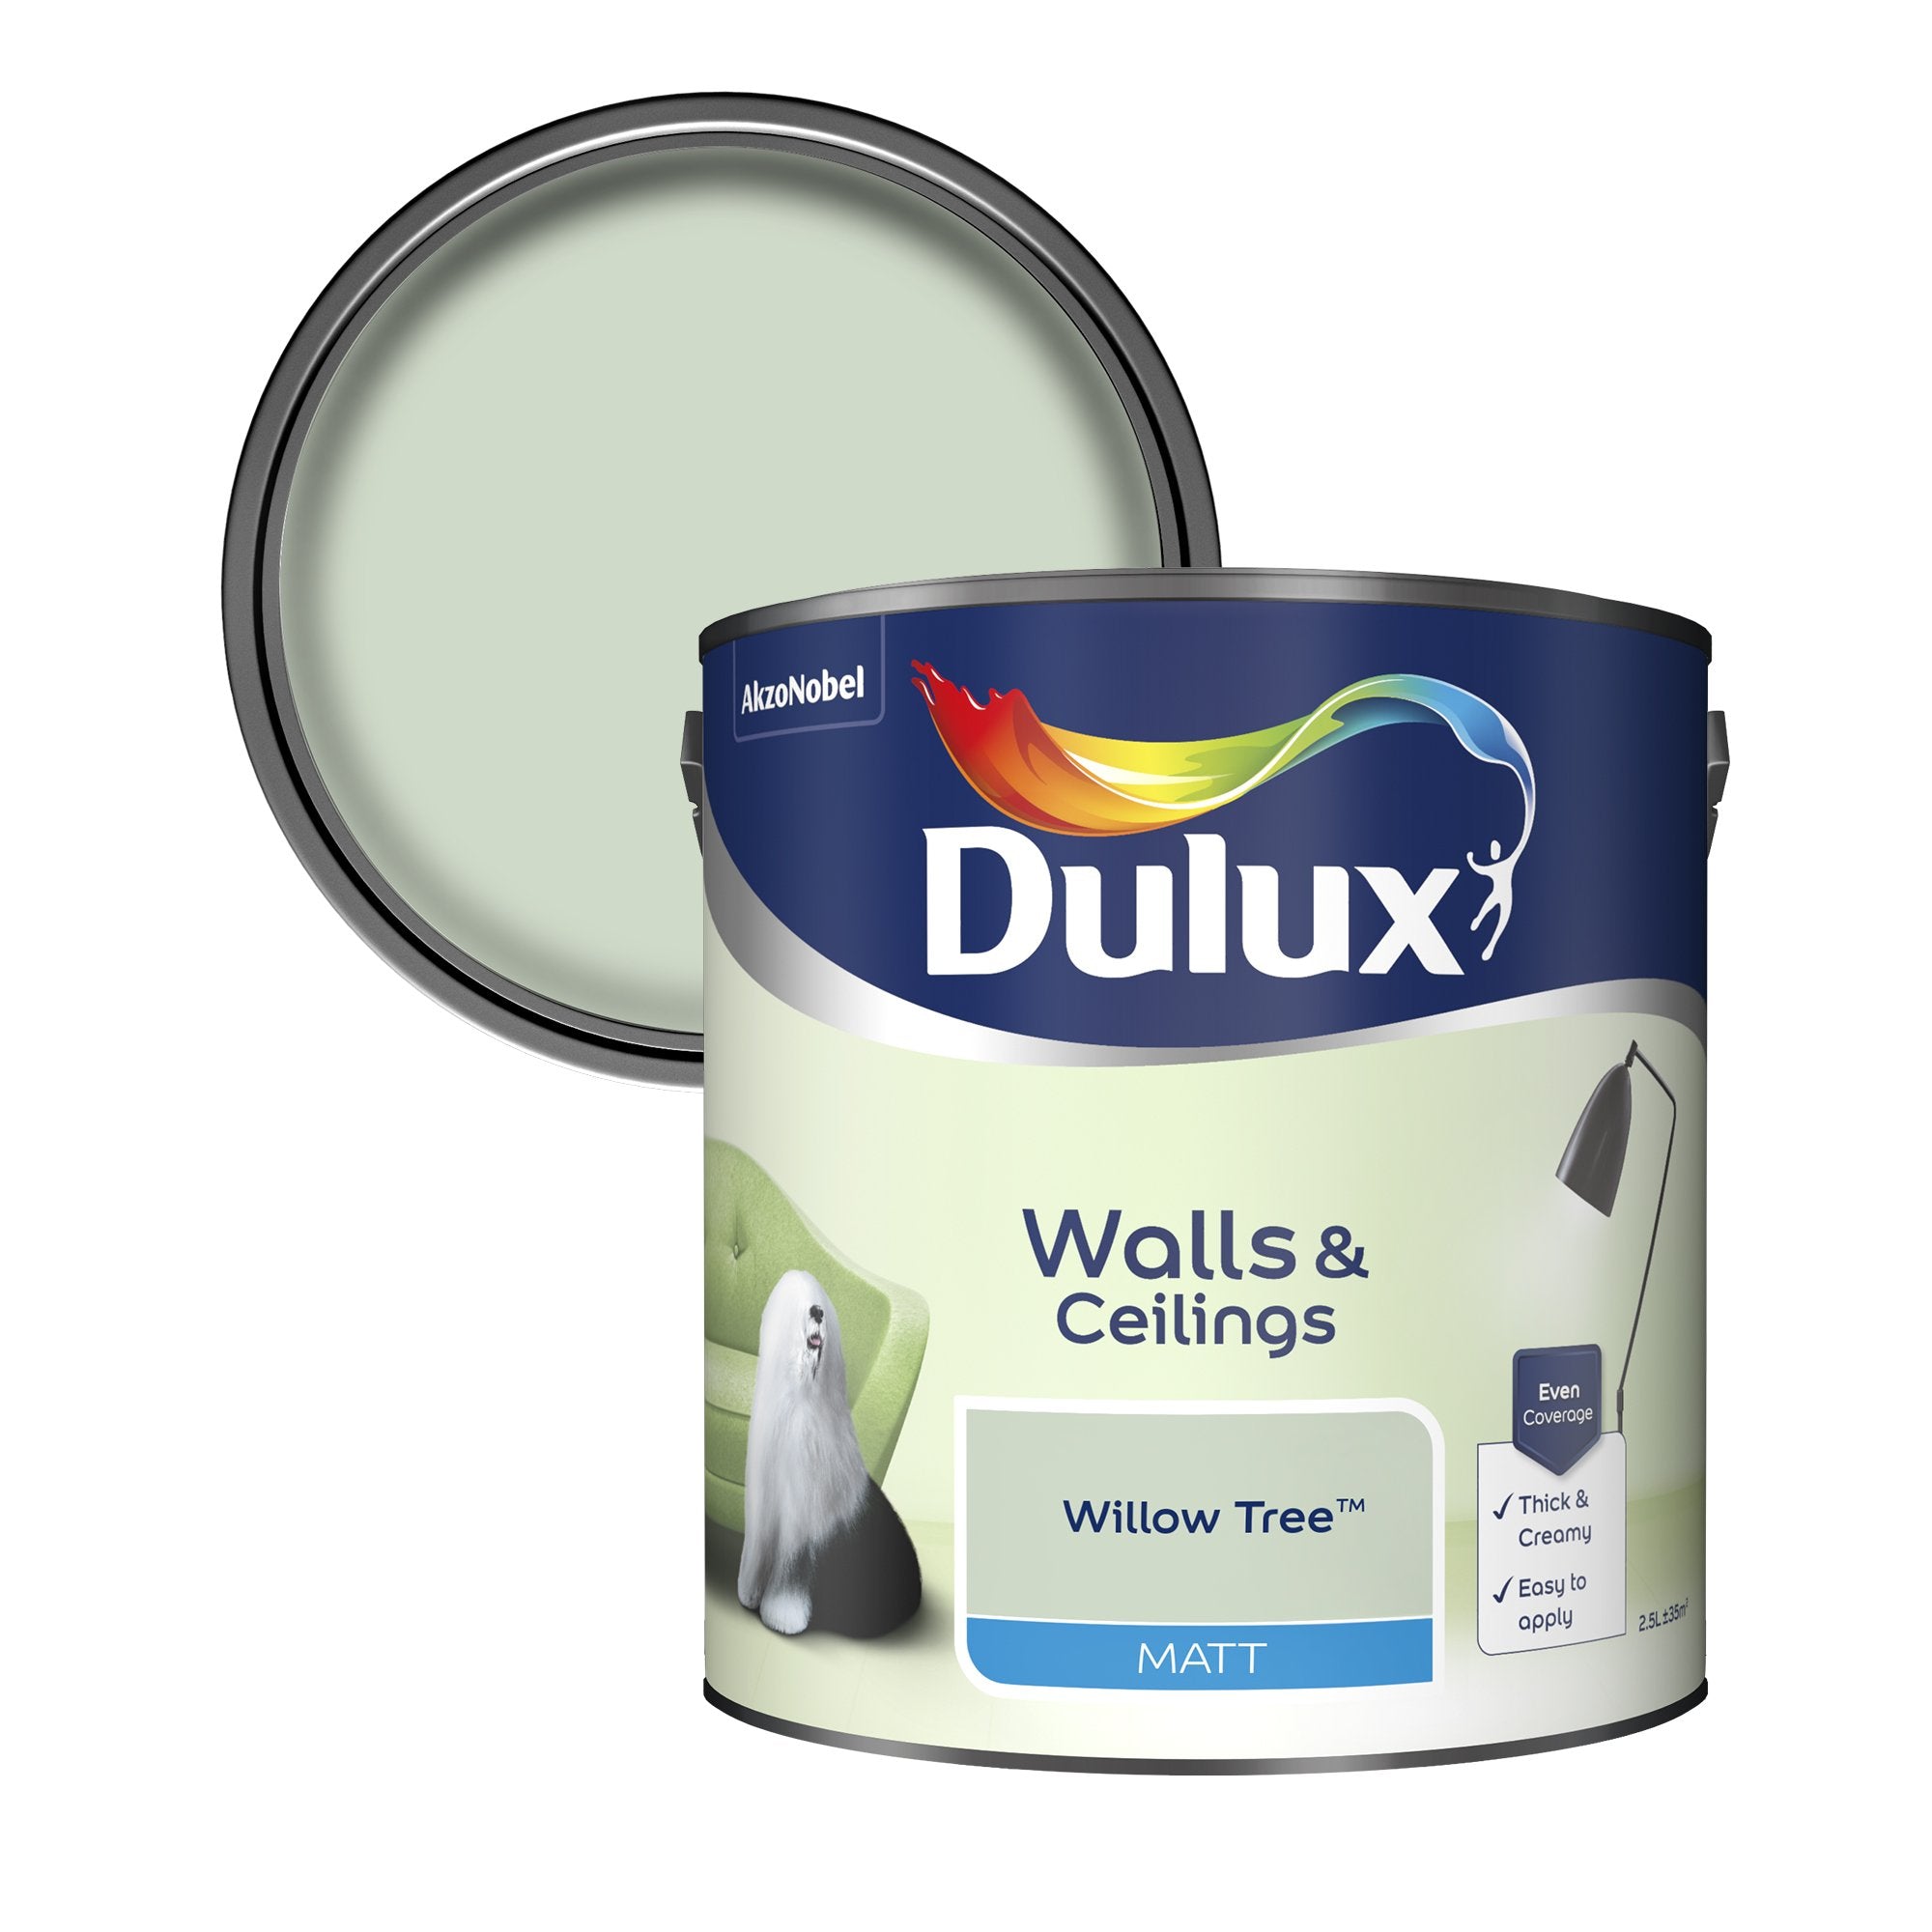 Dulux-Matt-Emulsion-Paint-For-Walls-And-Ceilings-Willow-Tree-2.5L